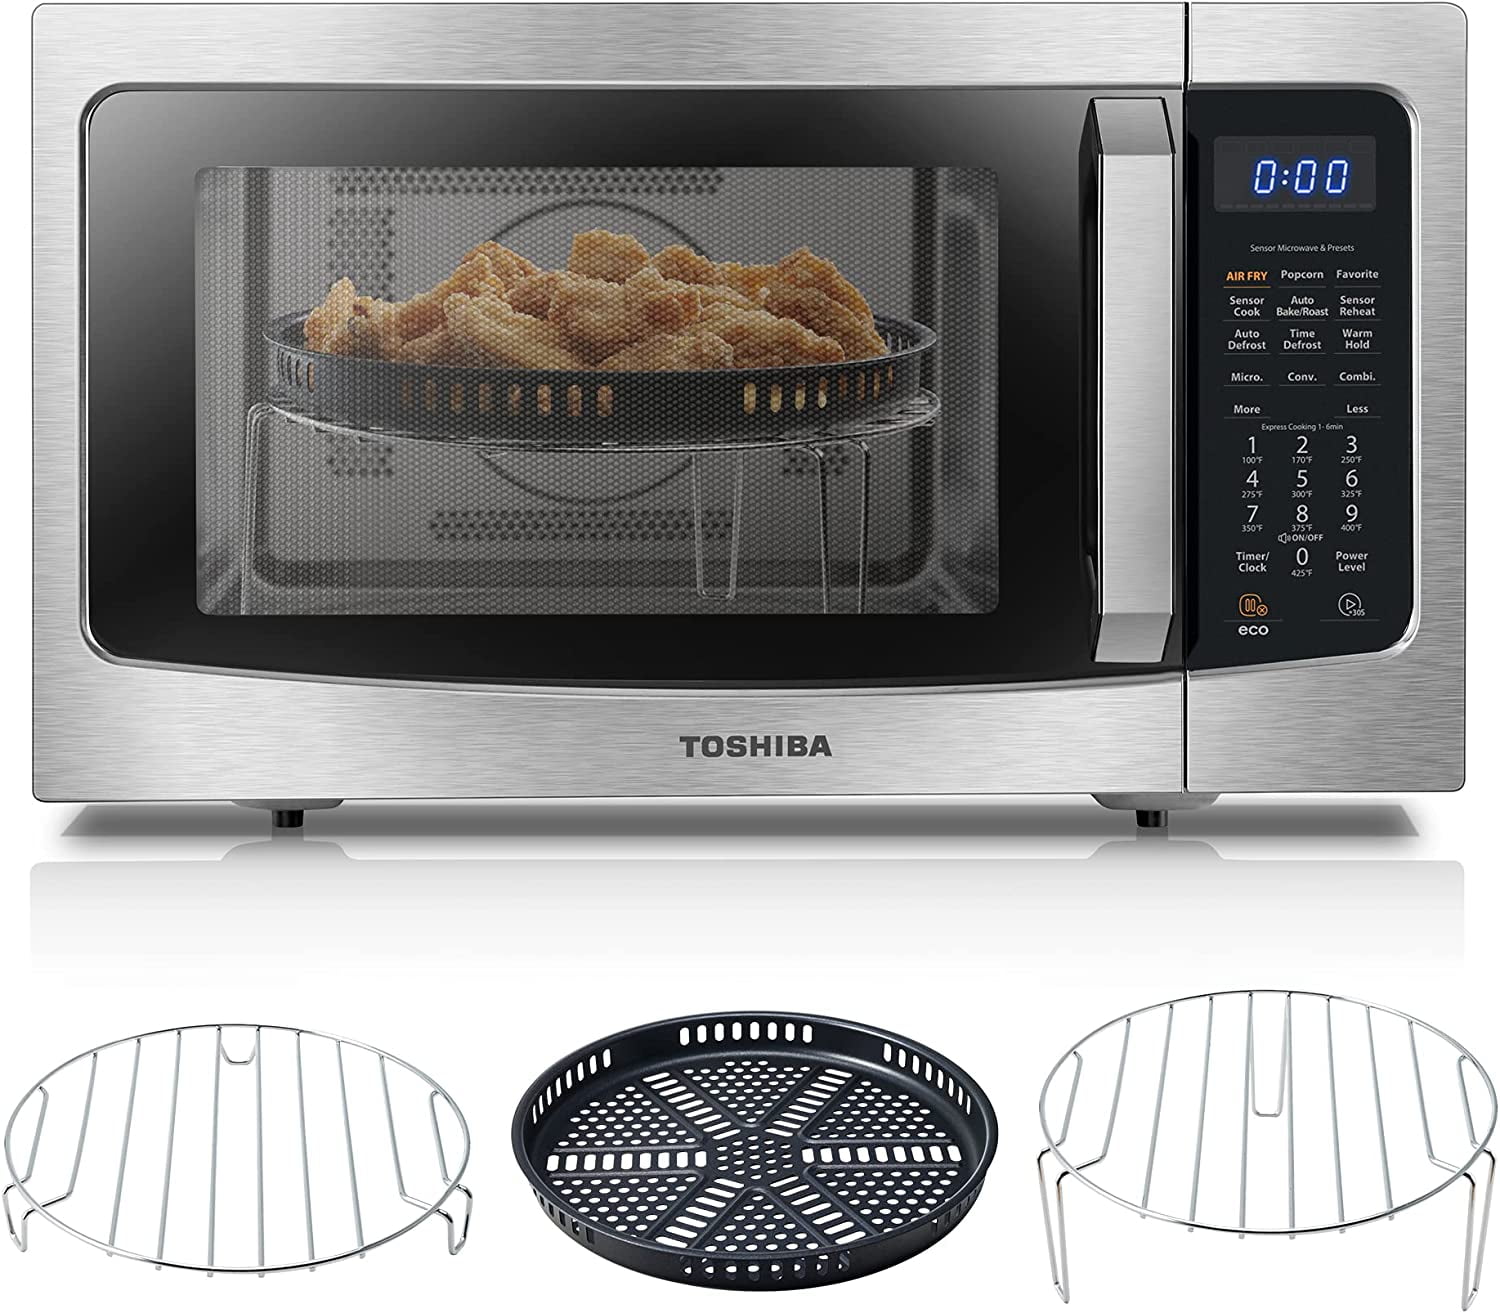 TOSHIBA 4-in-1, 1.5 cu. ft., Countertop Microwave Oven, Smart